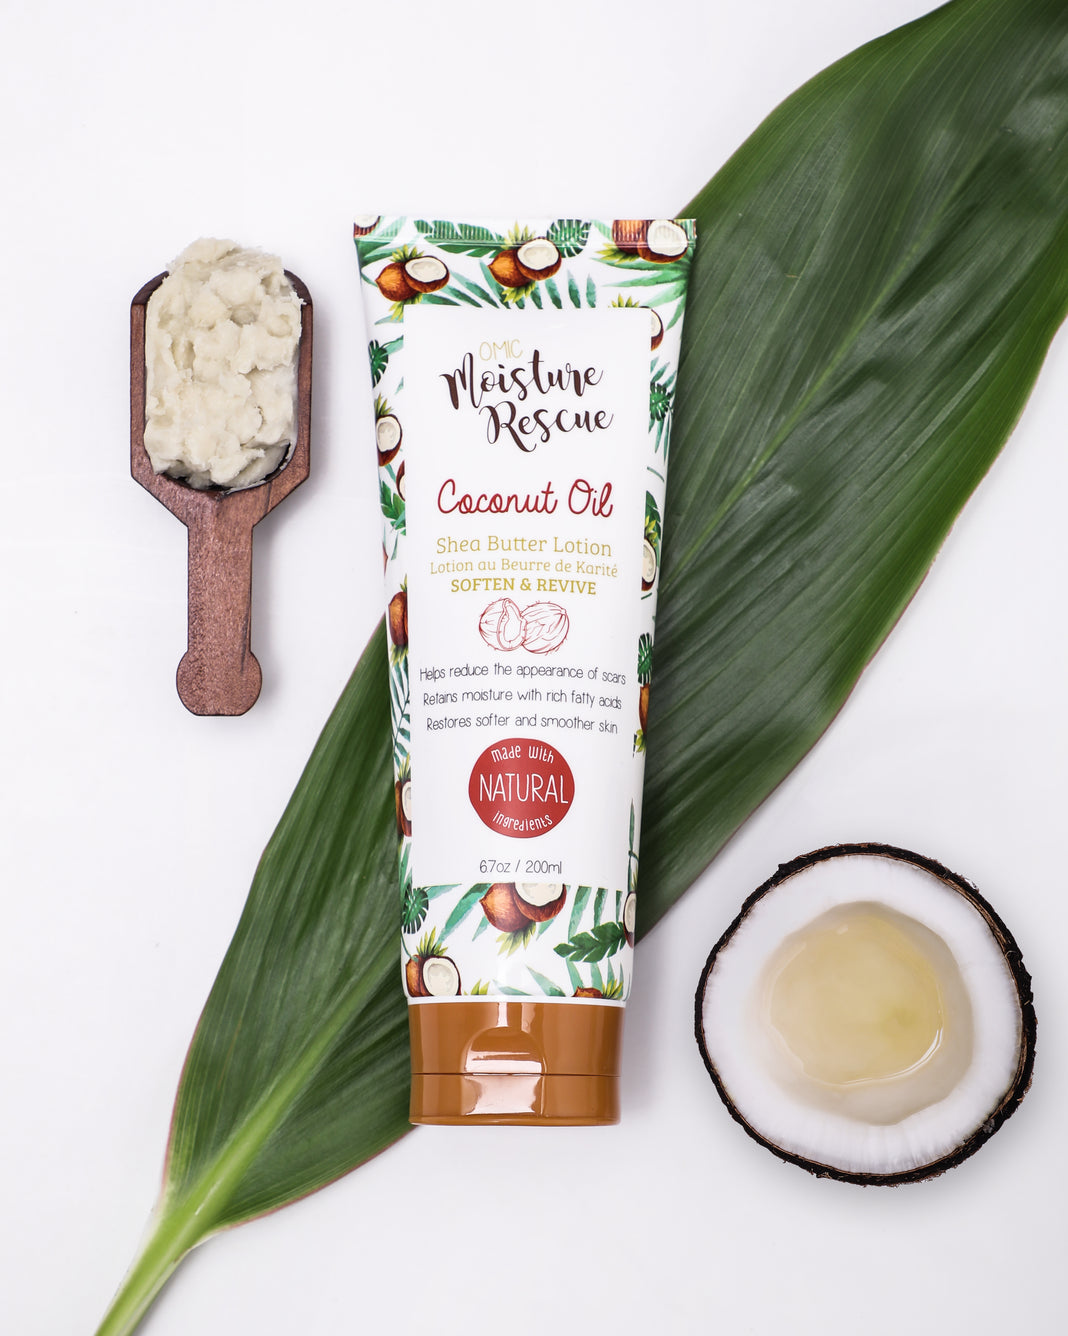 Moisture Rescue Shea Butter Lotion Tube  with Coconut Oil Mitchell Brands - Mitchell Brands - Skin Lightening, Skin Brightening, Fade Dark Spots, Shea Butter, Hair Growth Products